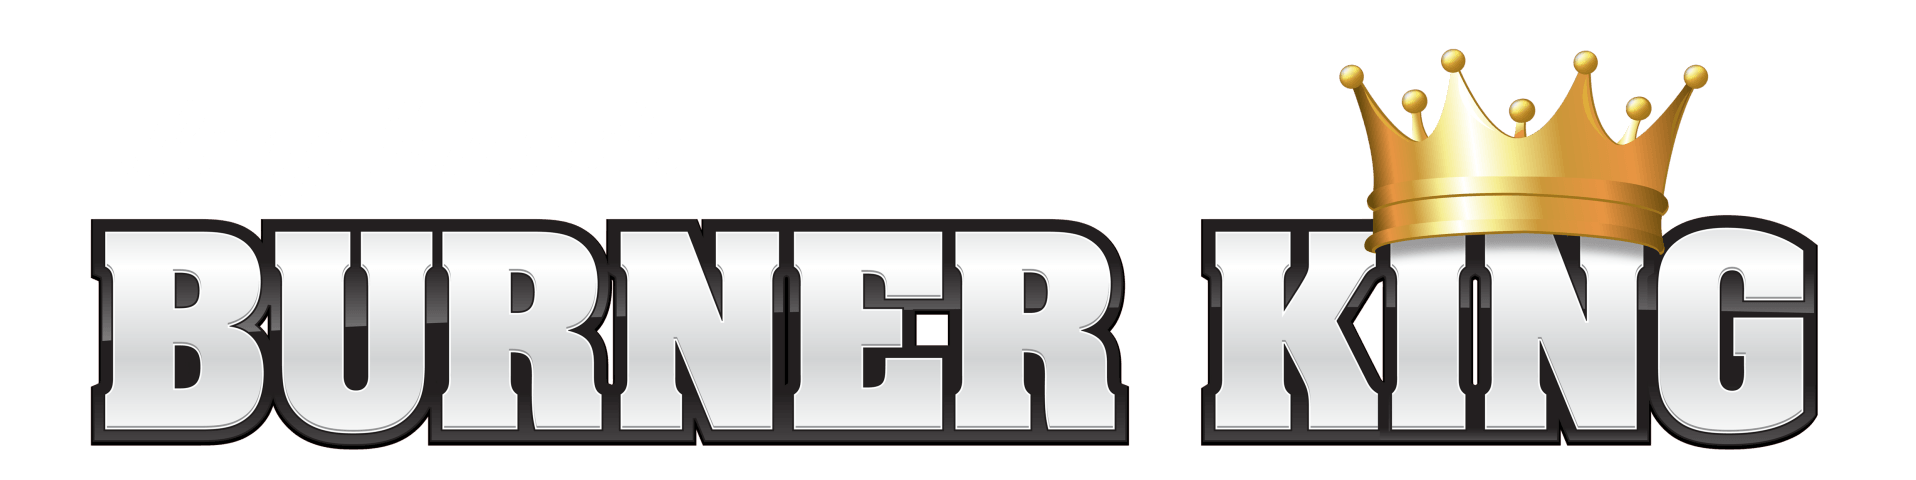 a logo for burner king with a gold crown